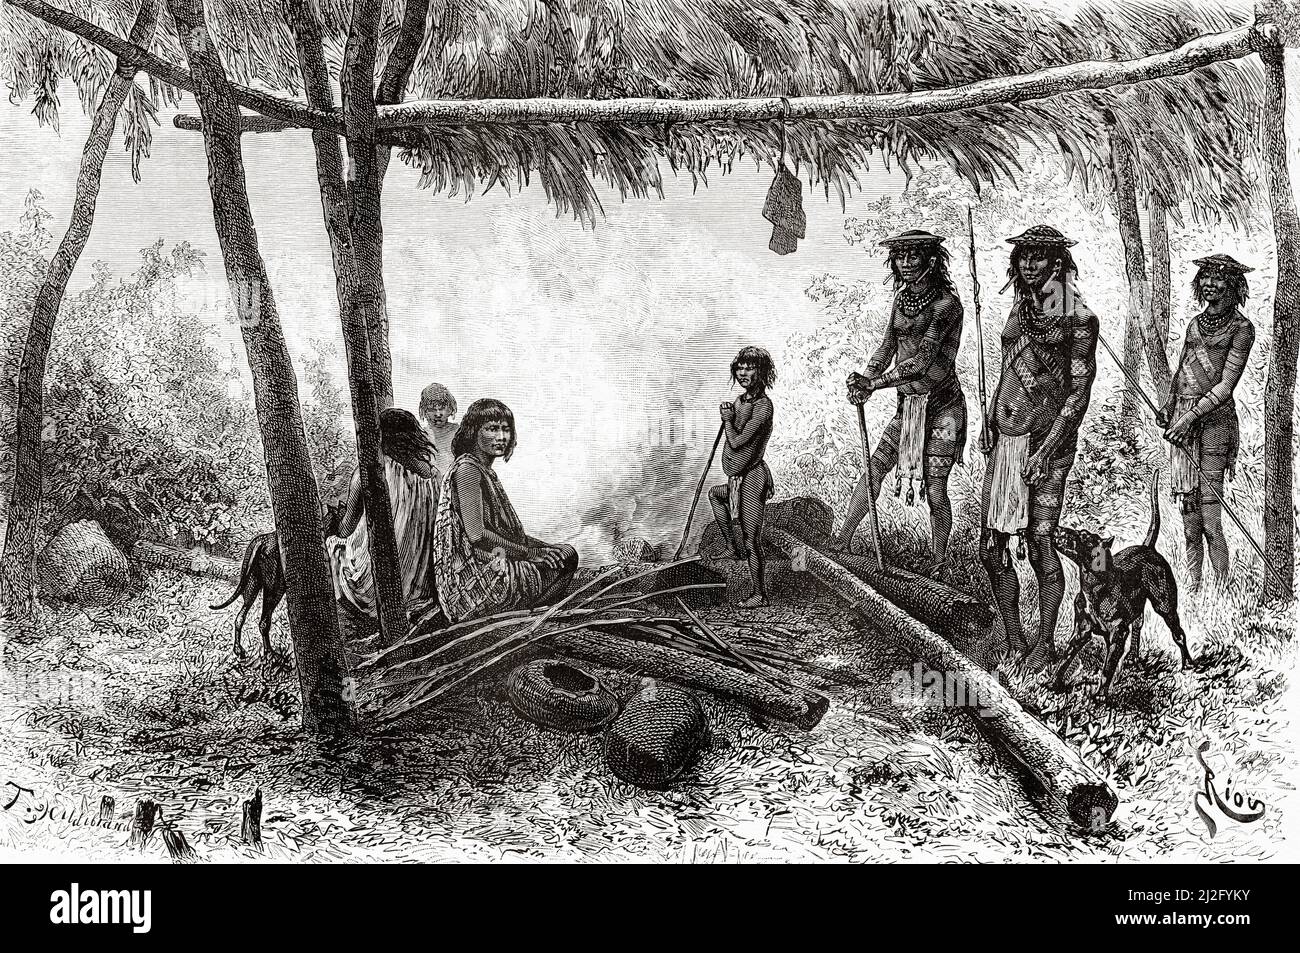 The Guahíbo Indians, Sikuani, Jivi or Jiwi are an indigenous people who live in the Llanos del Orinoco, between the Guaviare, Meta and Arauca rivers, in the Colombian departments of Vichada, Meta in Venezuela. South America. Voyage of exploration through New Granada and Venezuela by Jules Crevaux 1880-1881. Le Tour du Monde 1882 Stock Photo